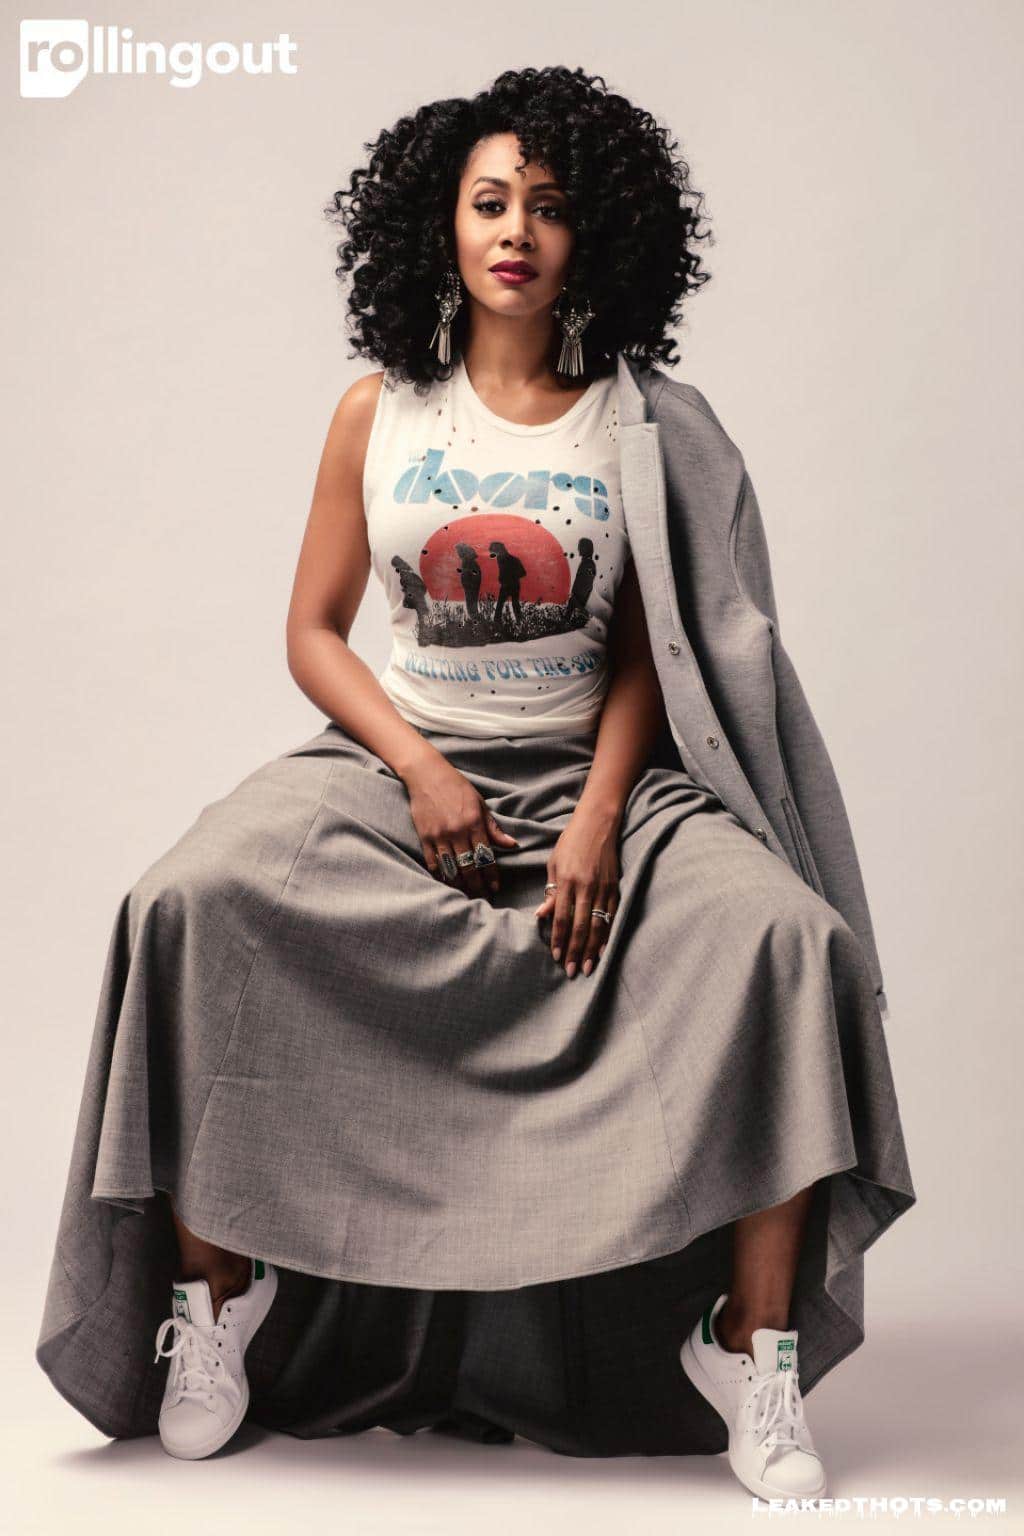 Simone Missick in a dress spreading her legs